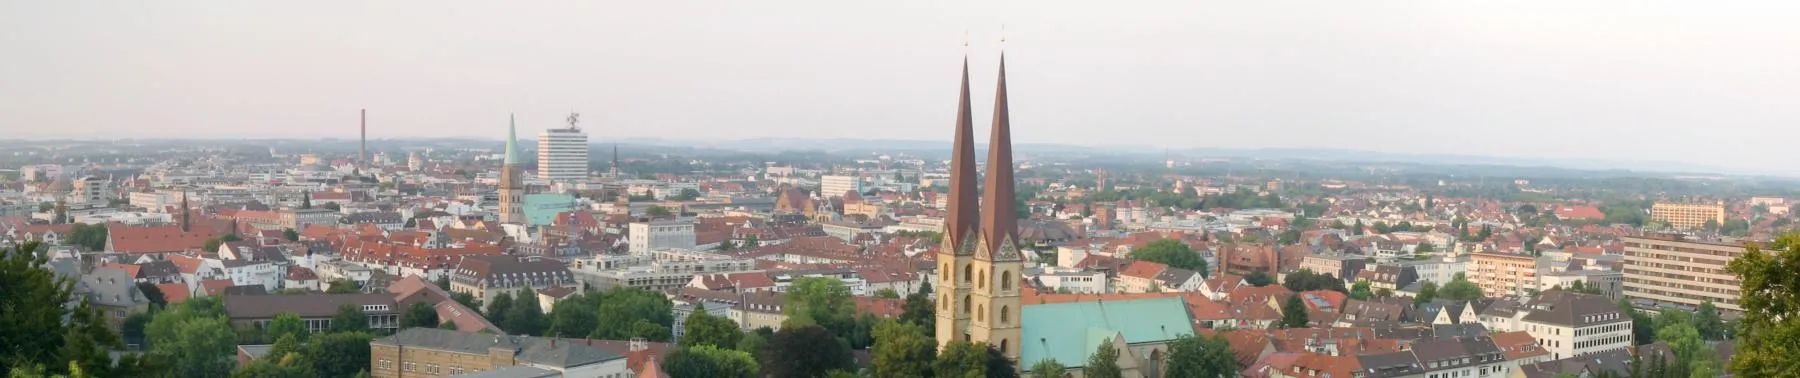 Photo showing: Bielefeld City seen from the Sparrenburg